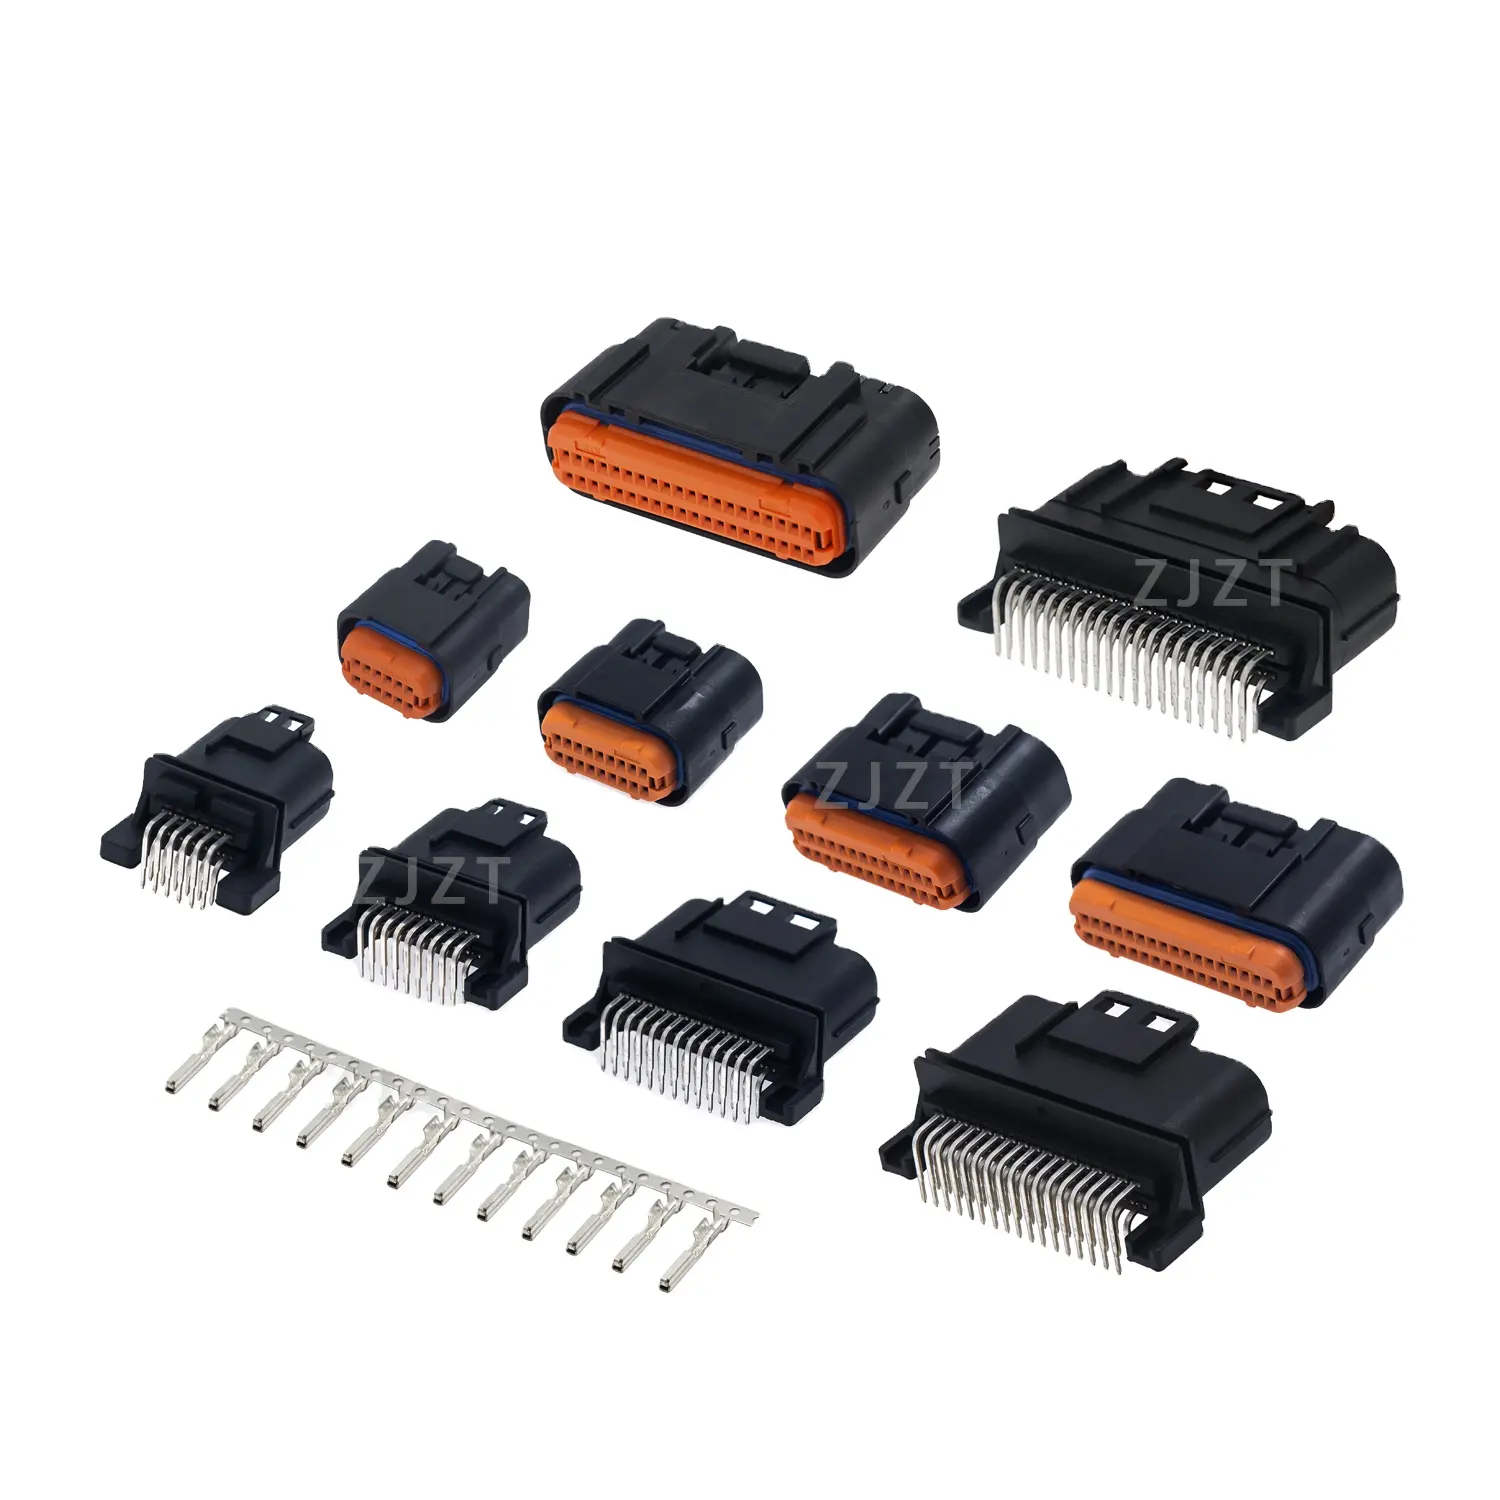 JAE type automotive waterproof connector PCB board end harness plug/male + female connection/large stock